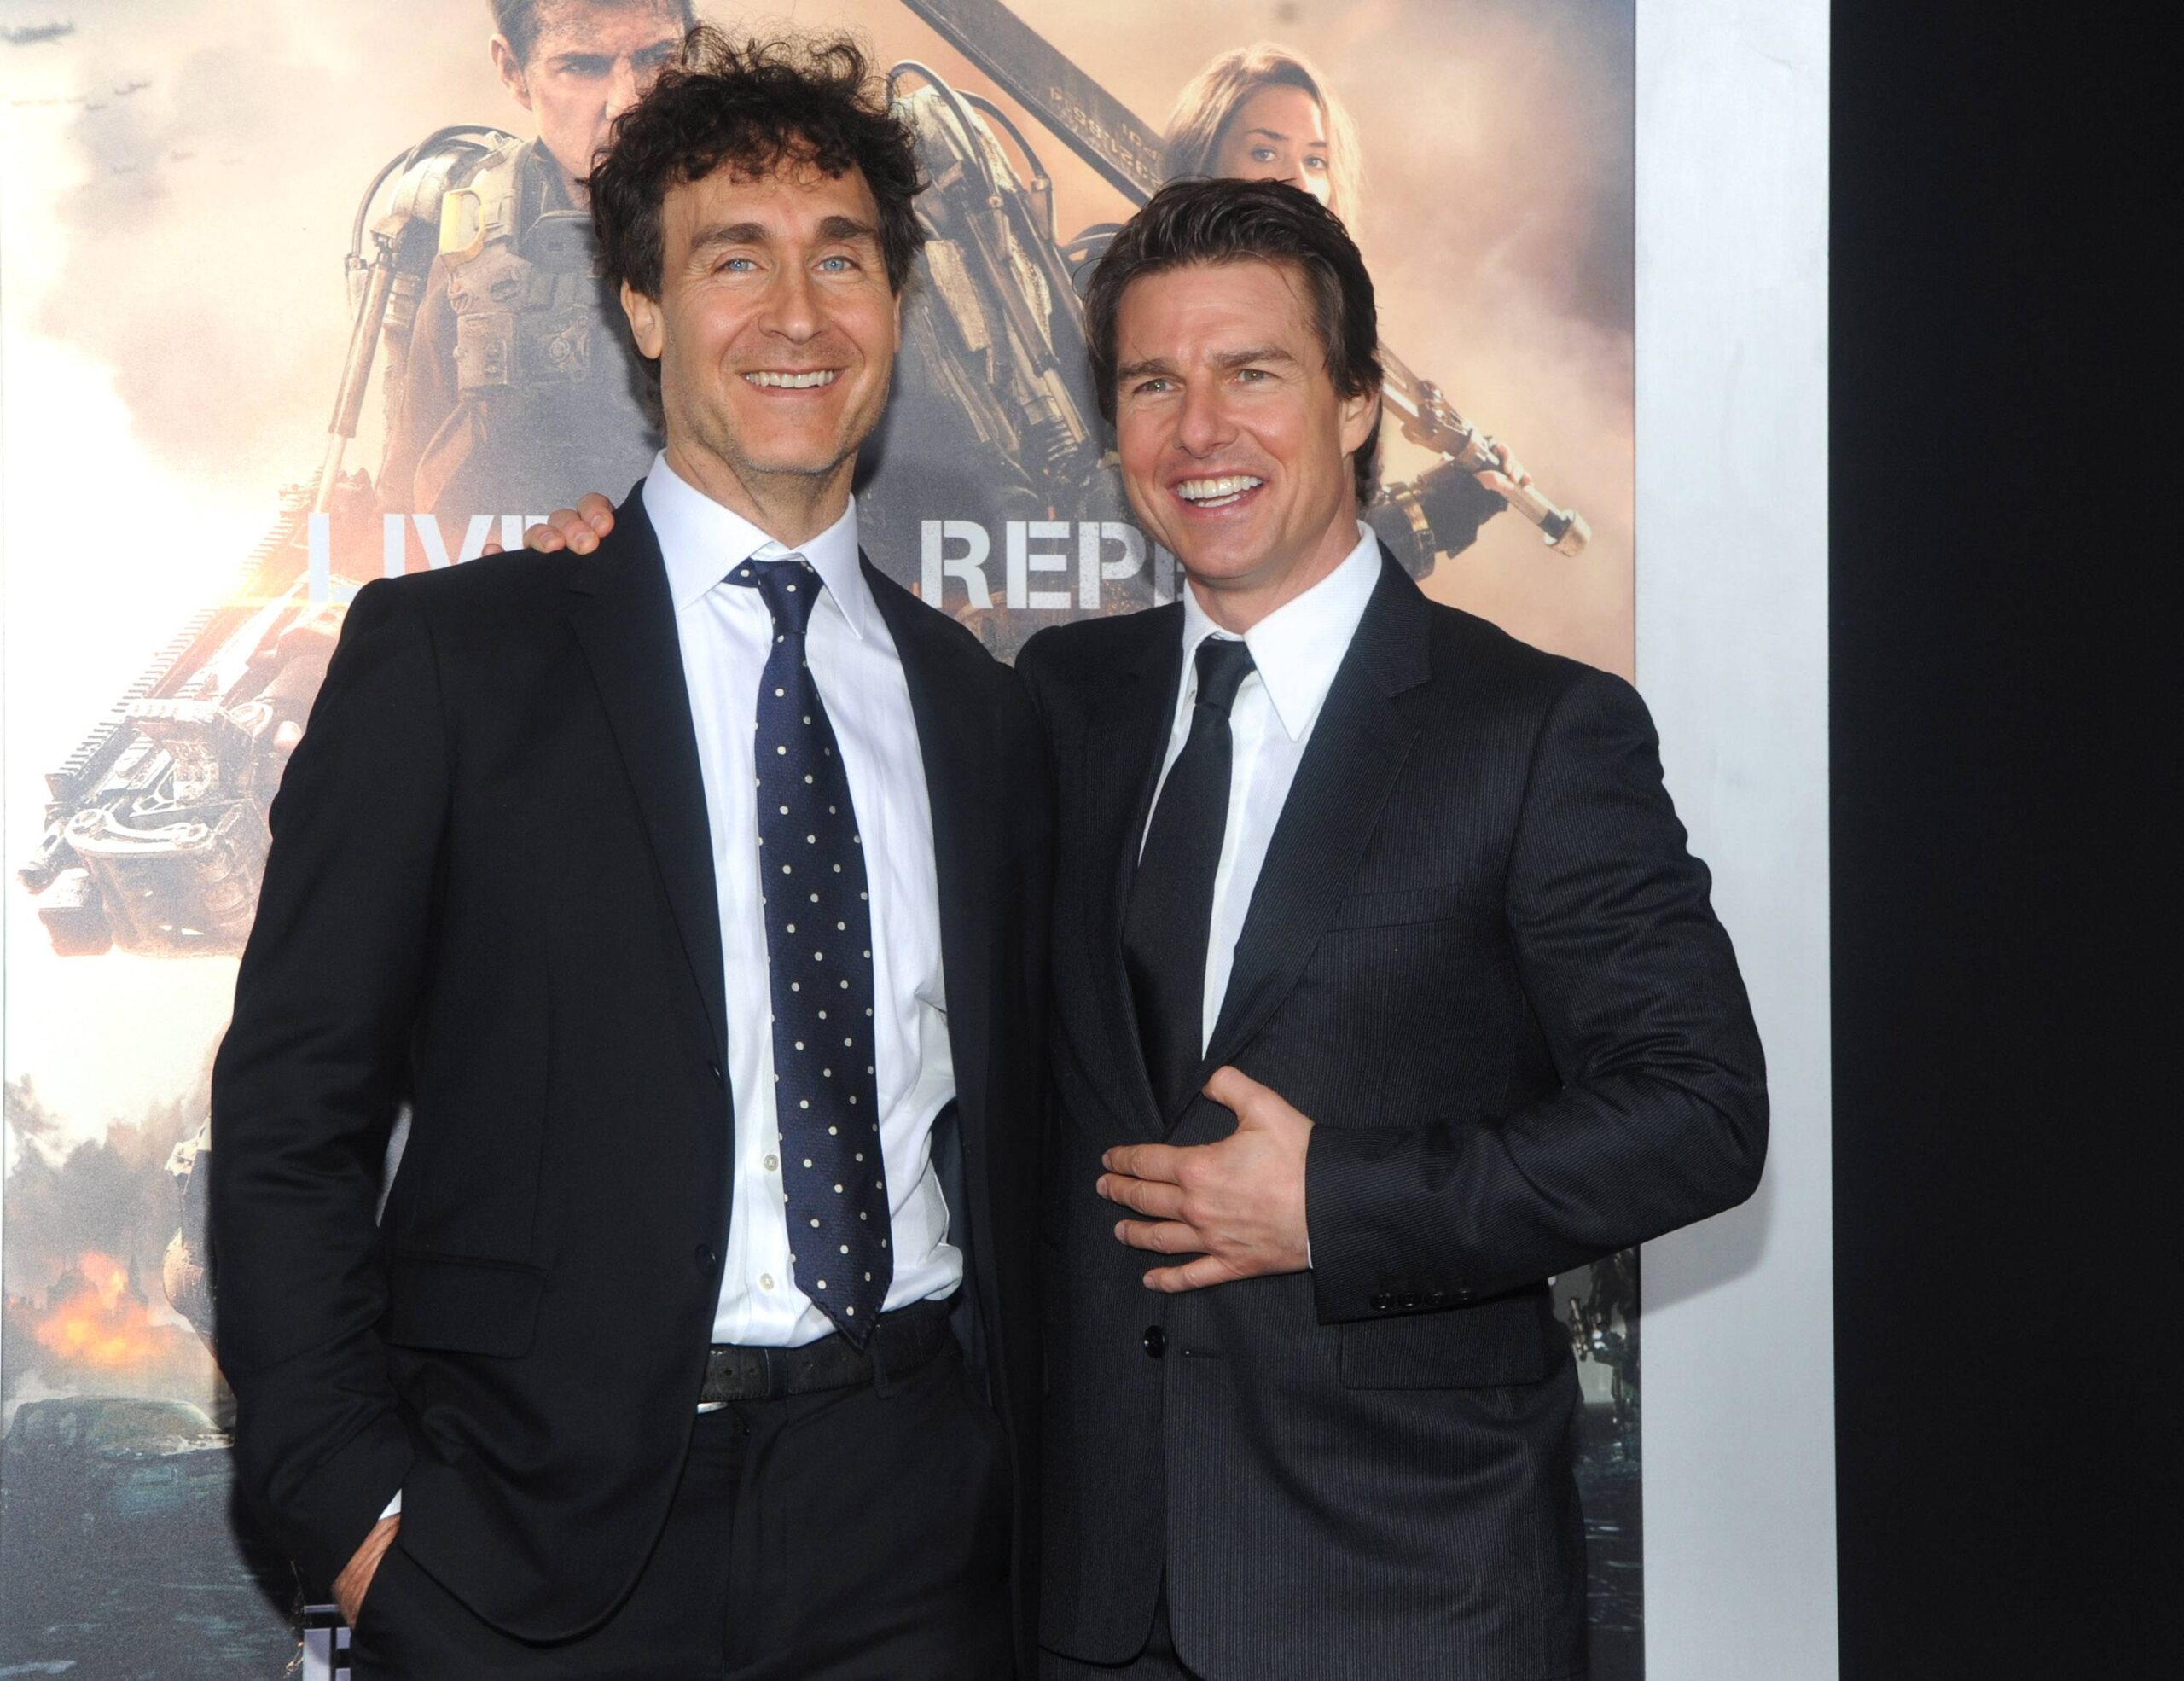 Tom Cruise and Doug Liman EDGE OF TOMORROW PREMIERE New York PUBLICATIONxNOTxINxUSAxUK NYPixs/PicturePerfect

Tom Cruise and Doug Liman Edge of Tomorrow Premiere New York PUBLICATIONxNOTxINxUSAxUK  Picture Perfect